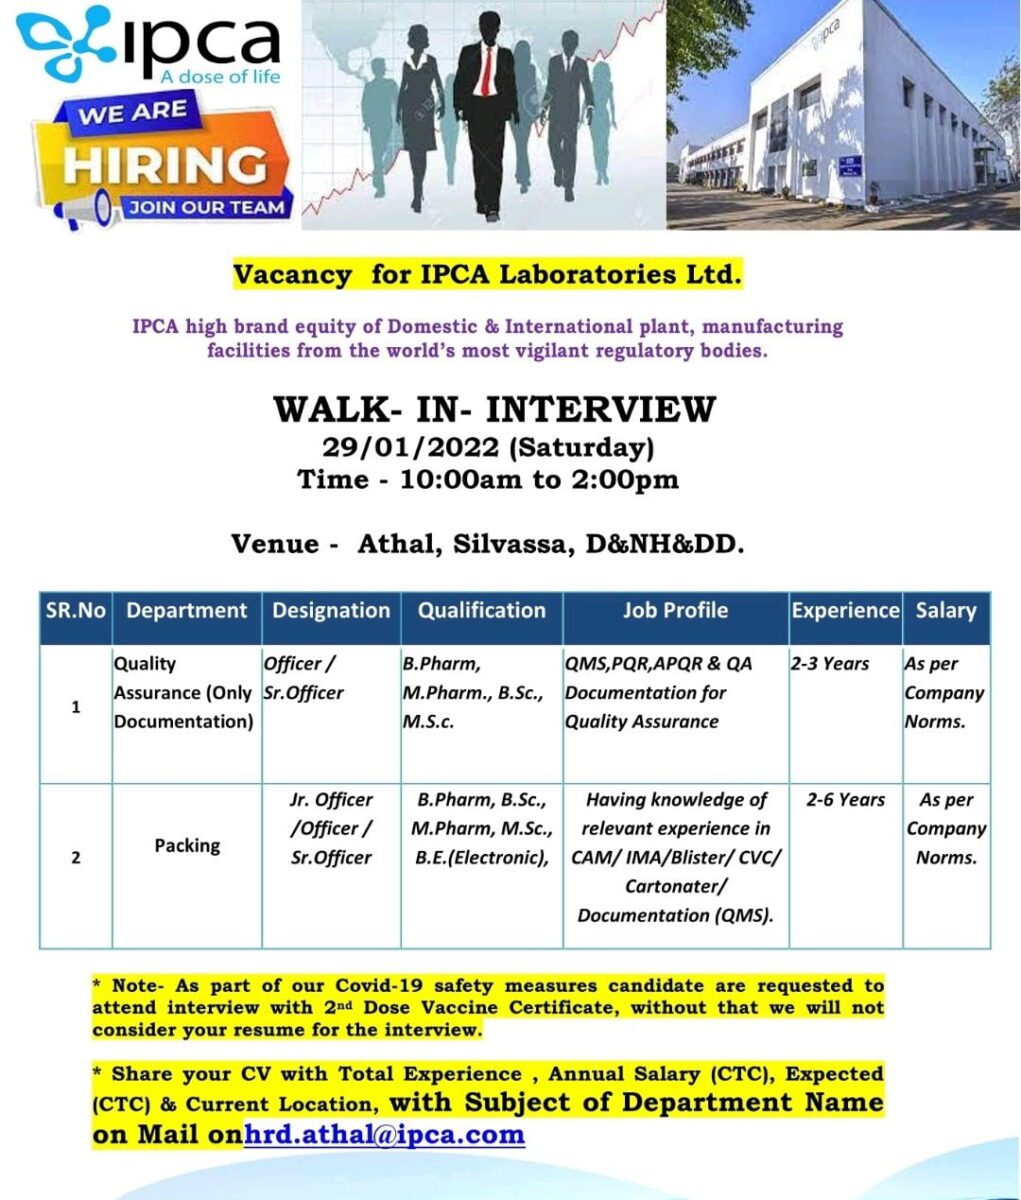 Ipca Laboratories Looking for Bsc, m pharm, b pharm, msc Candidates for Quality Assurance, Packing Departments at Silvassa